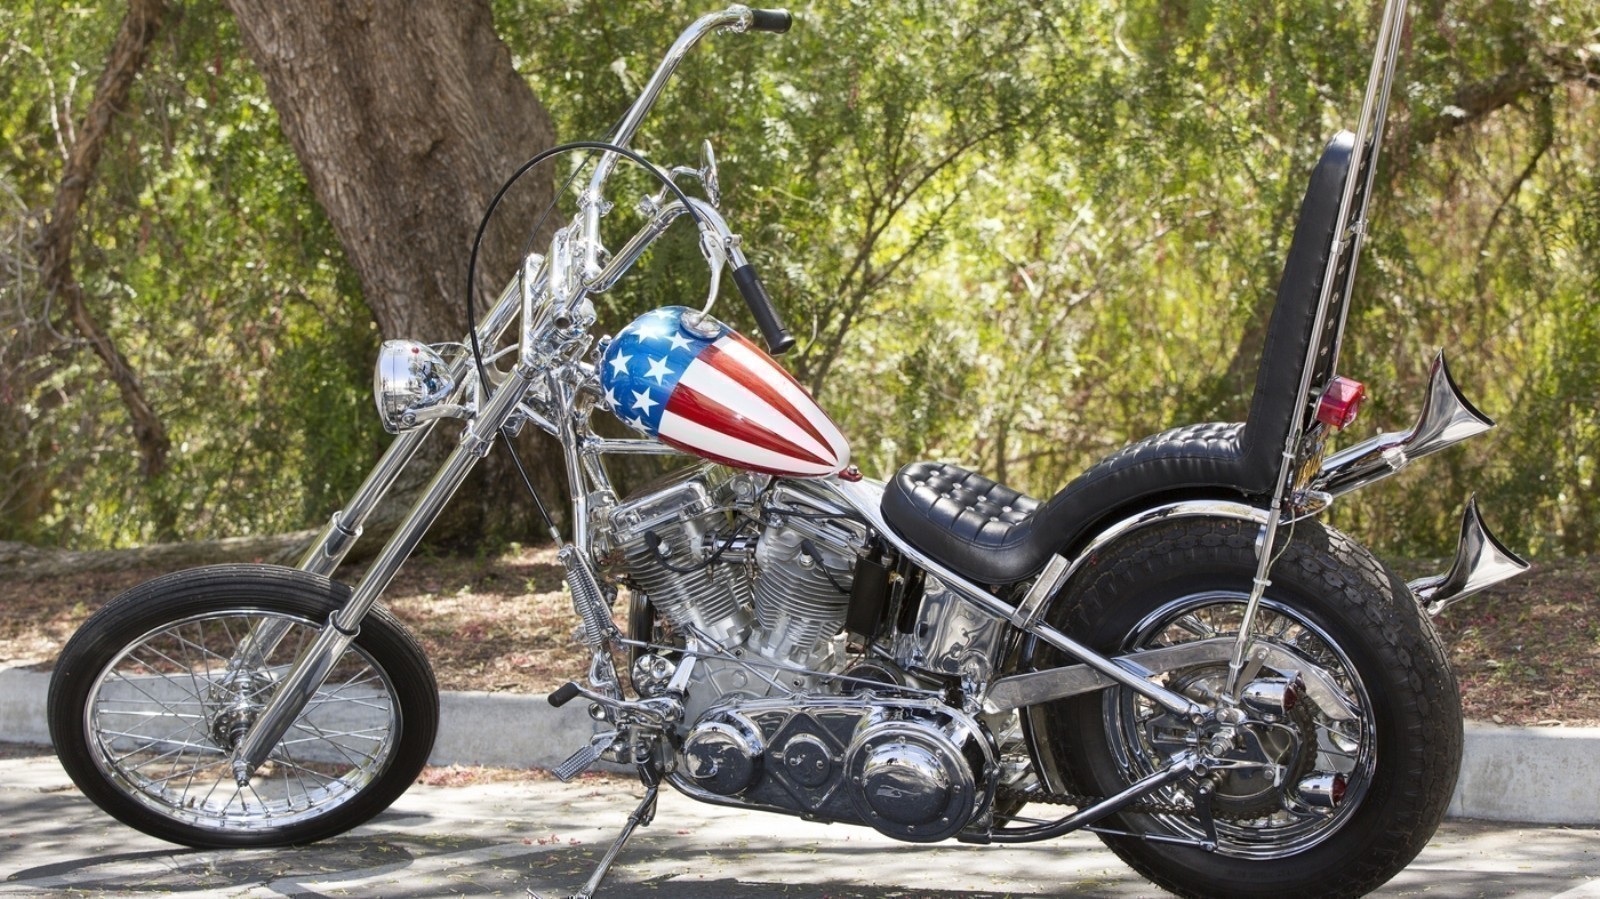 The Profiles In History auction house in Calabasas, Calif., is auctioning off the supposedly last authentic 'Captain America' chopper used in the film Easy Rider.Â The proceeds will go in part towards Michael Eisenberg, the current owner of the bike, as well as to the auction house and the American Humane Association